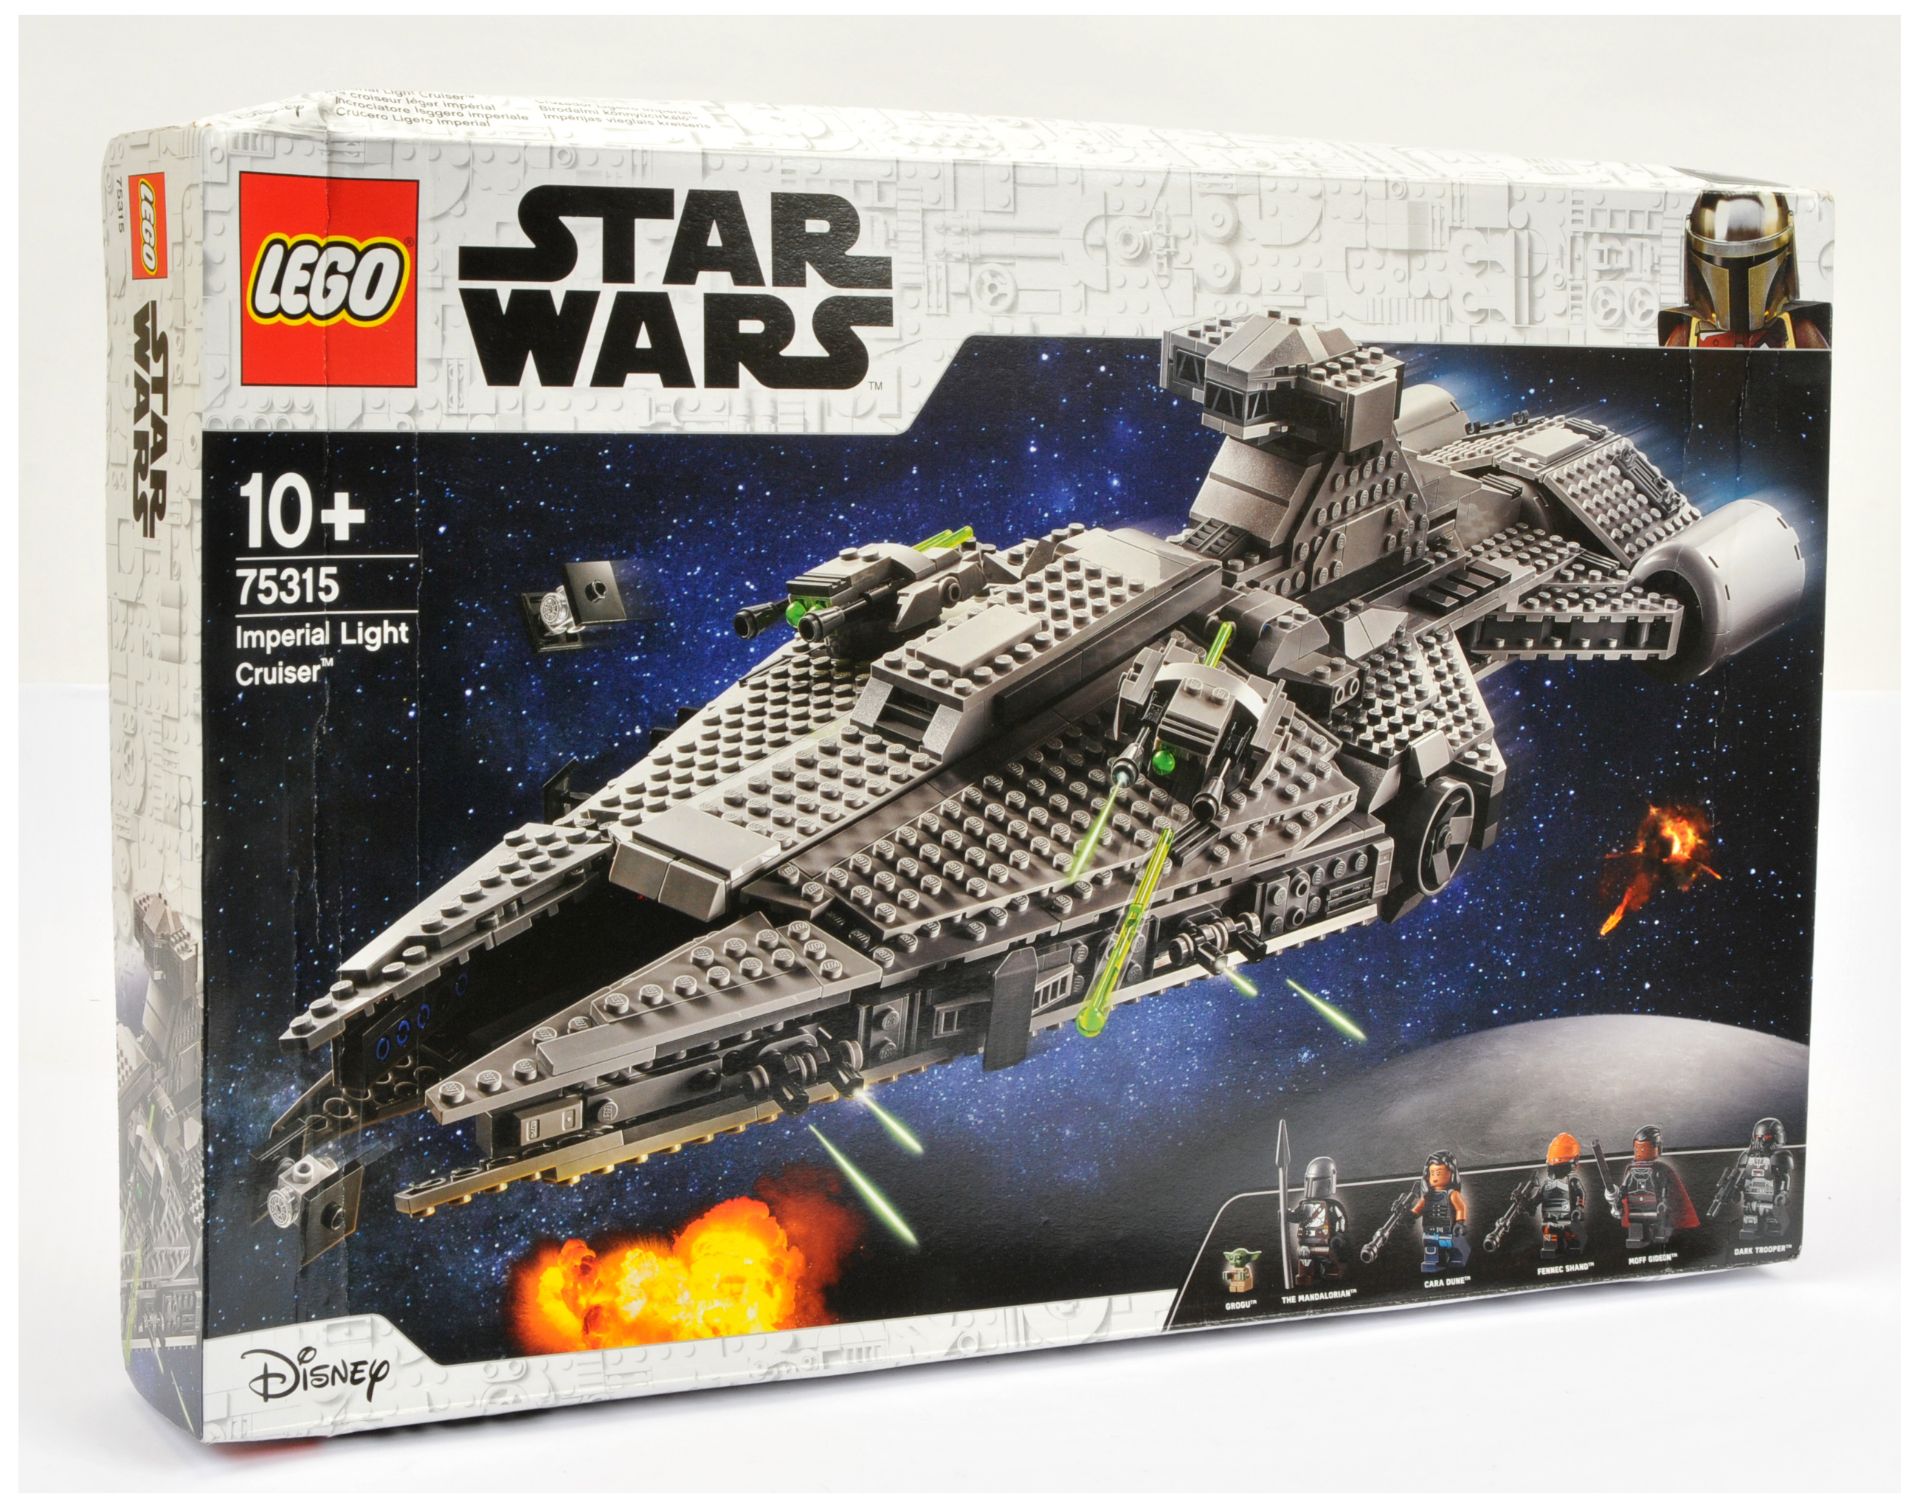 Lego Star Wars 75315 Imperial Light Cruiser, within Good Sealed Packaging (the packaging has a qu...